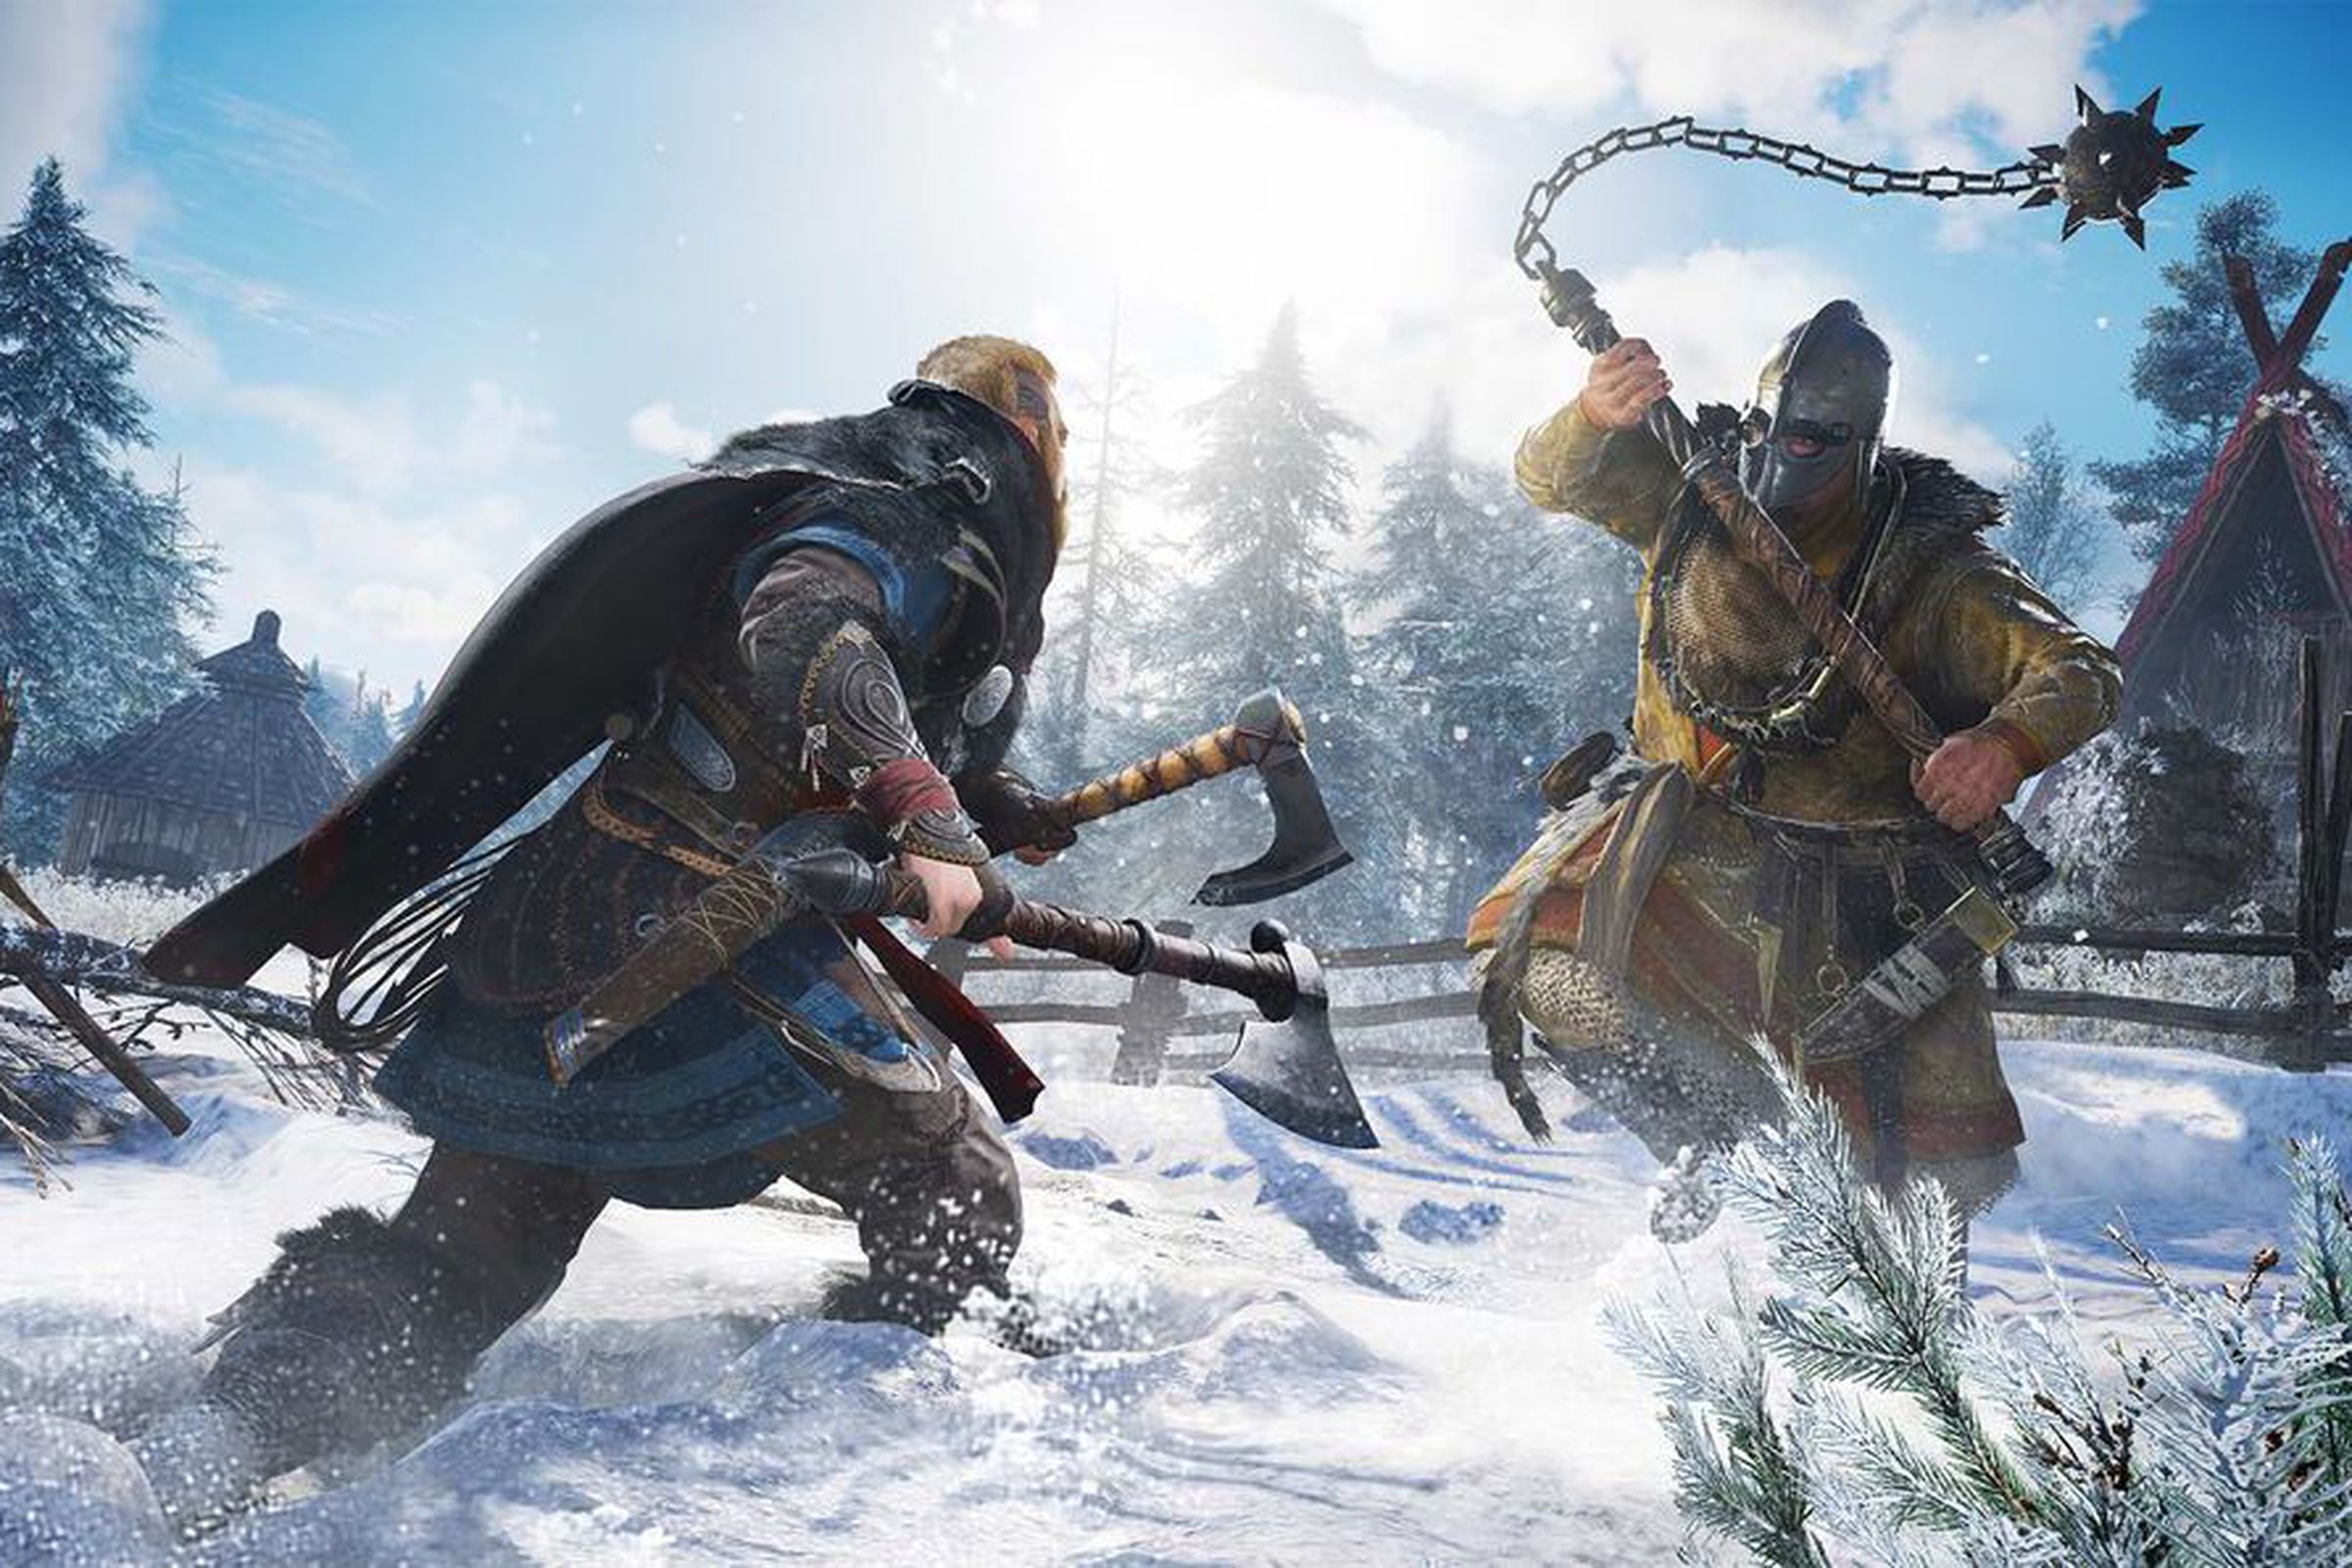 The main character from Assassin’s Creed Valhalla fights an enemy in a snowy battlefield.